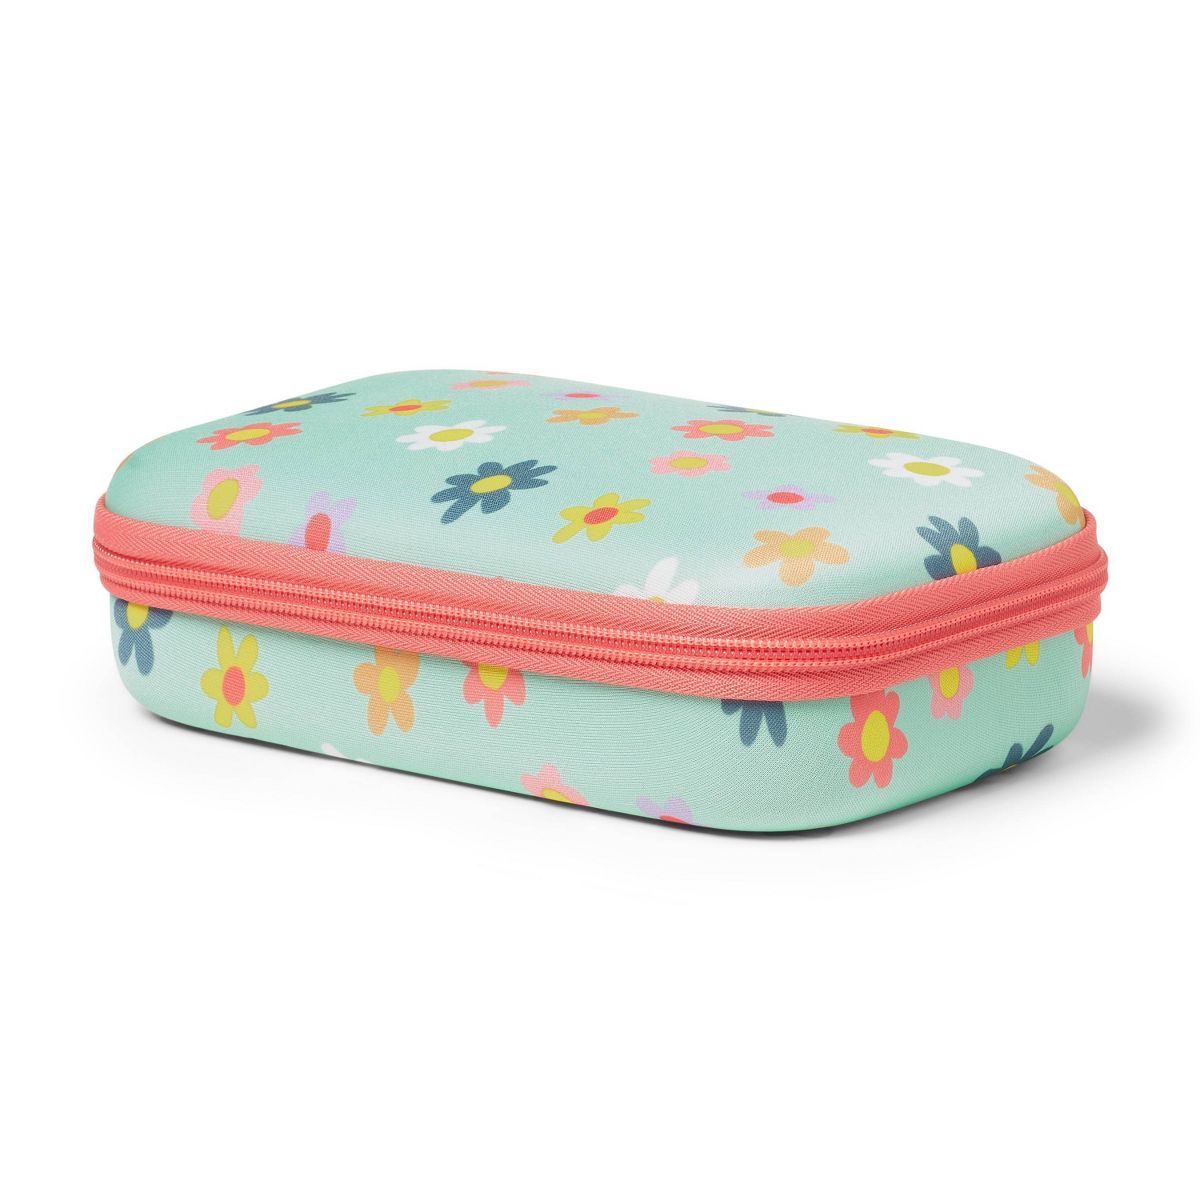 Hard Sided Fabric Pencil Case Teal Daisy - up & up™ | Target